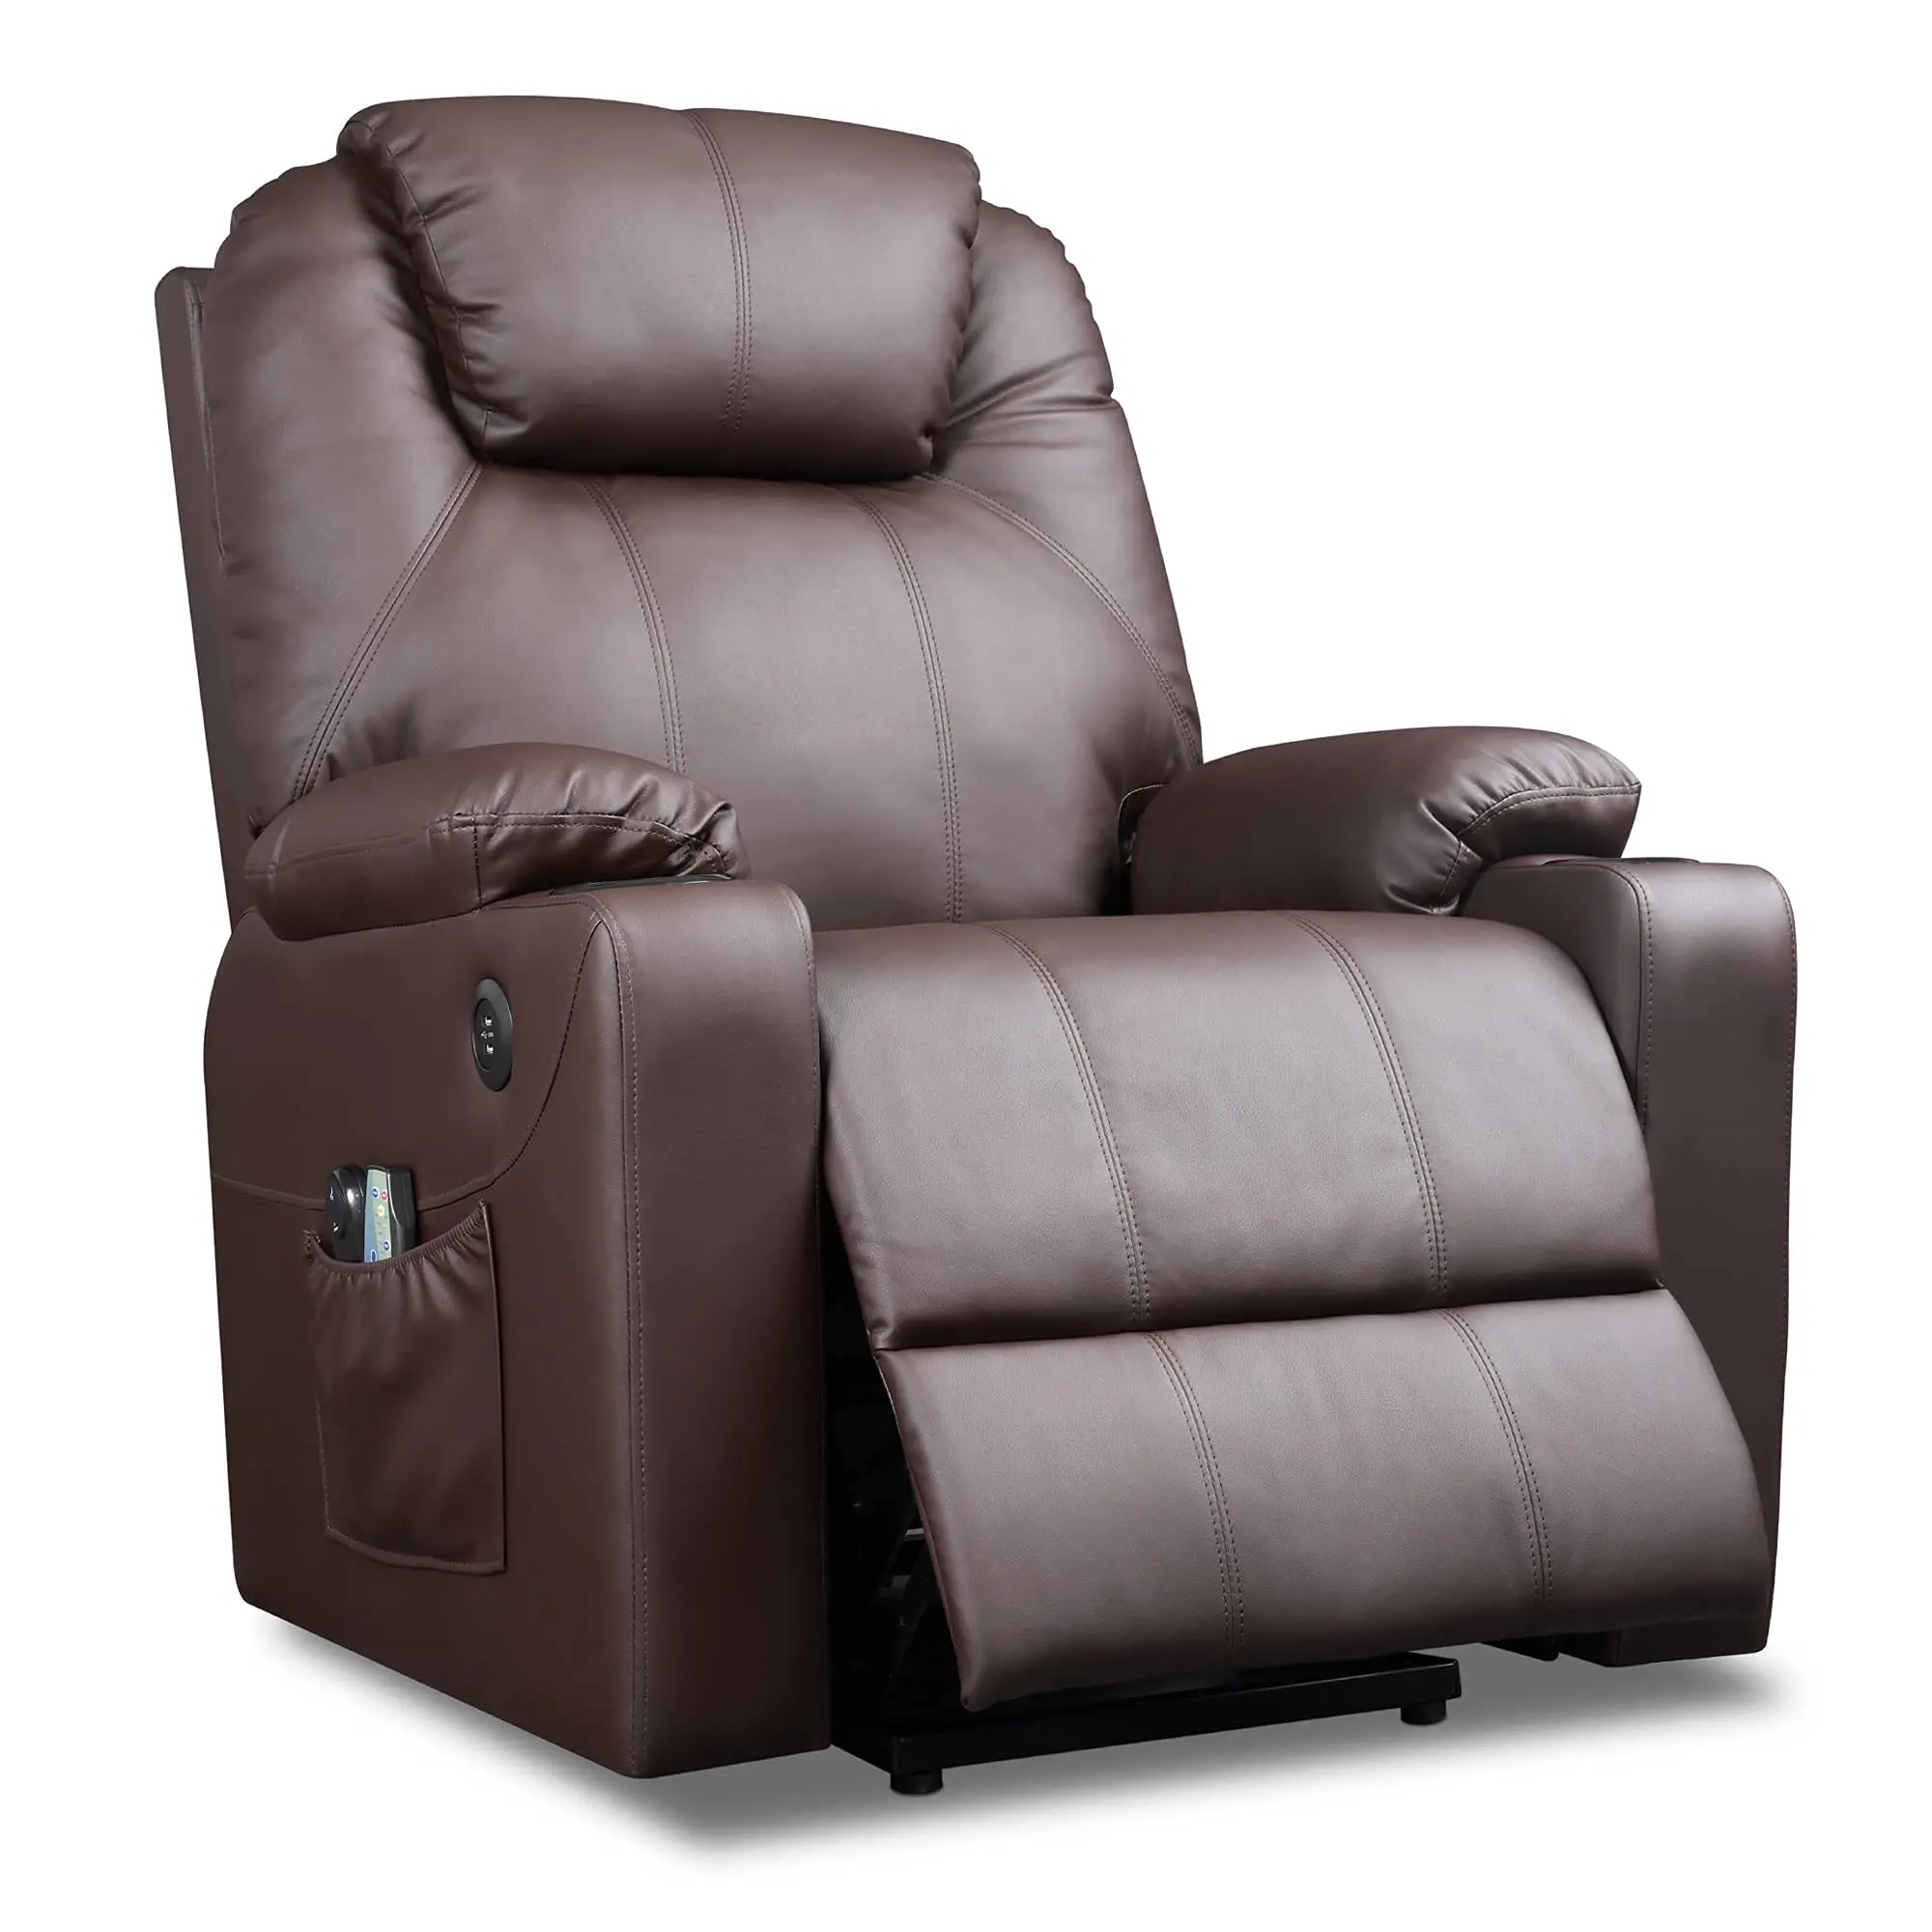 

Modern Faux Leather Rotate Rocking Reclining Sofa Chairs with 8 Vibrate Massage function in Living Room, Grey